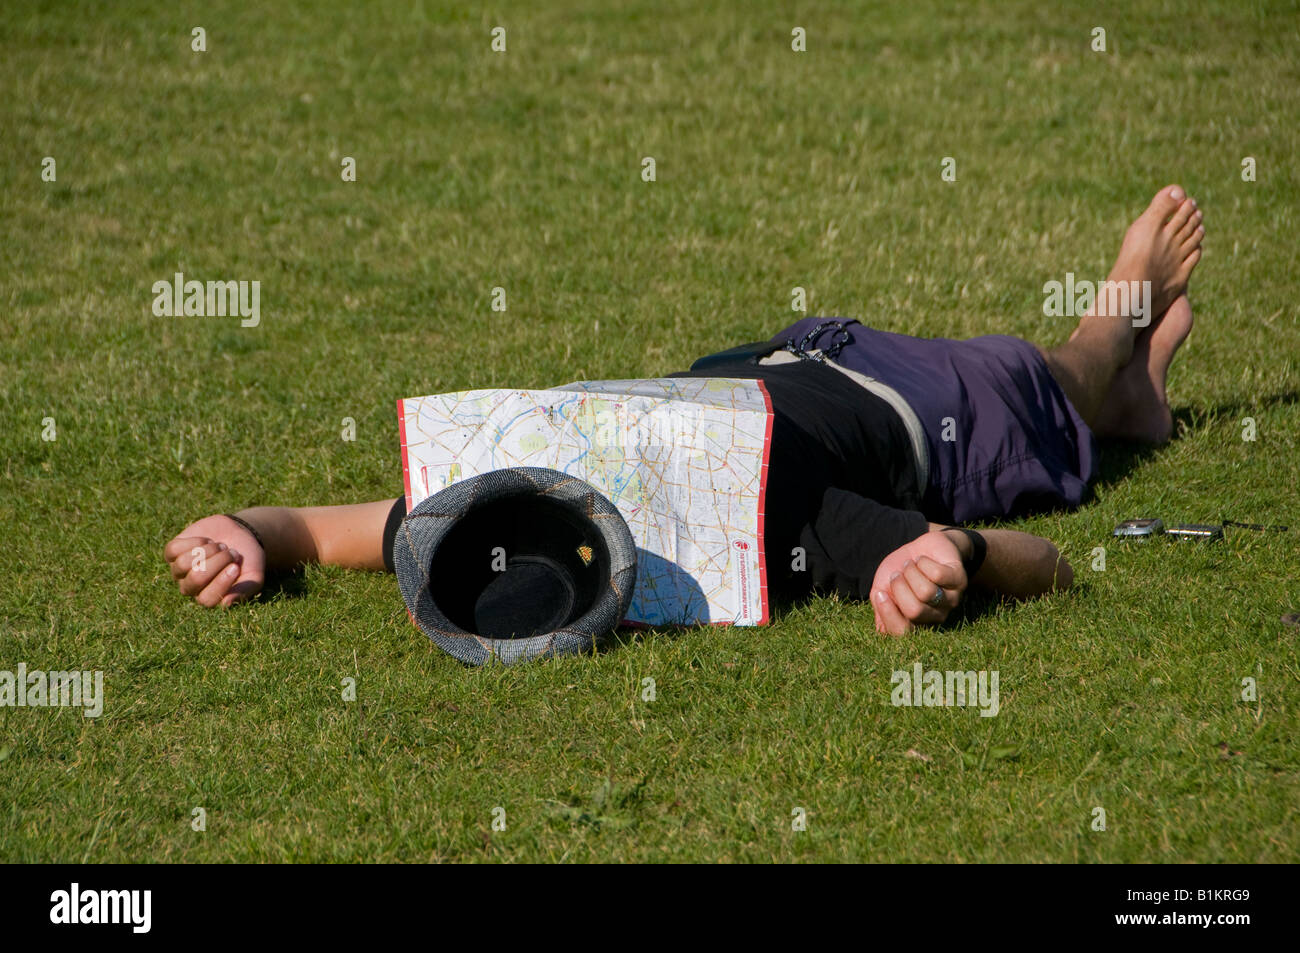 A man covers his head with a map as he takes the sun in a public park Mitte Quarter Berlin Germany Stock Photo